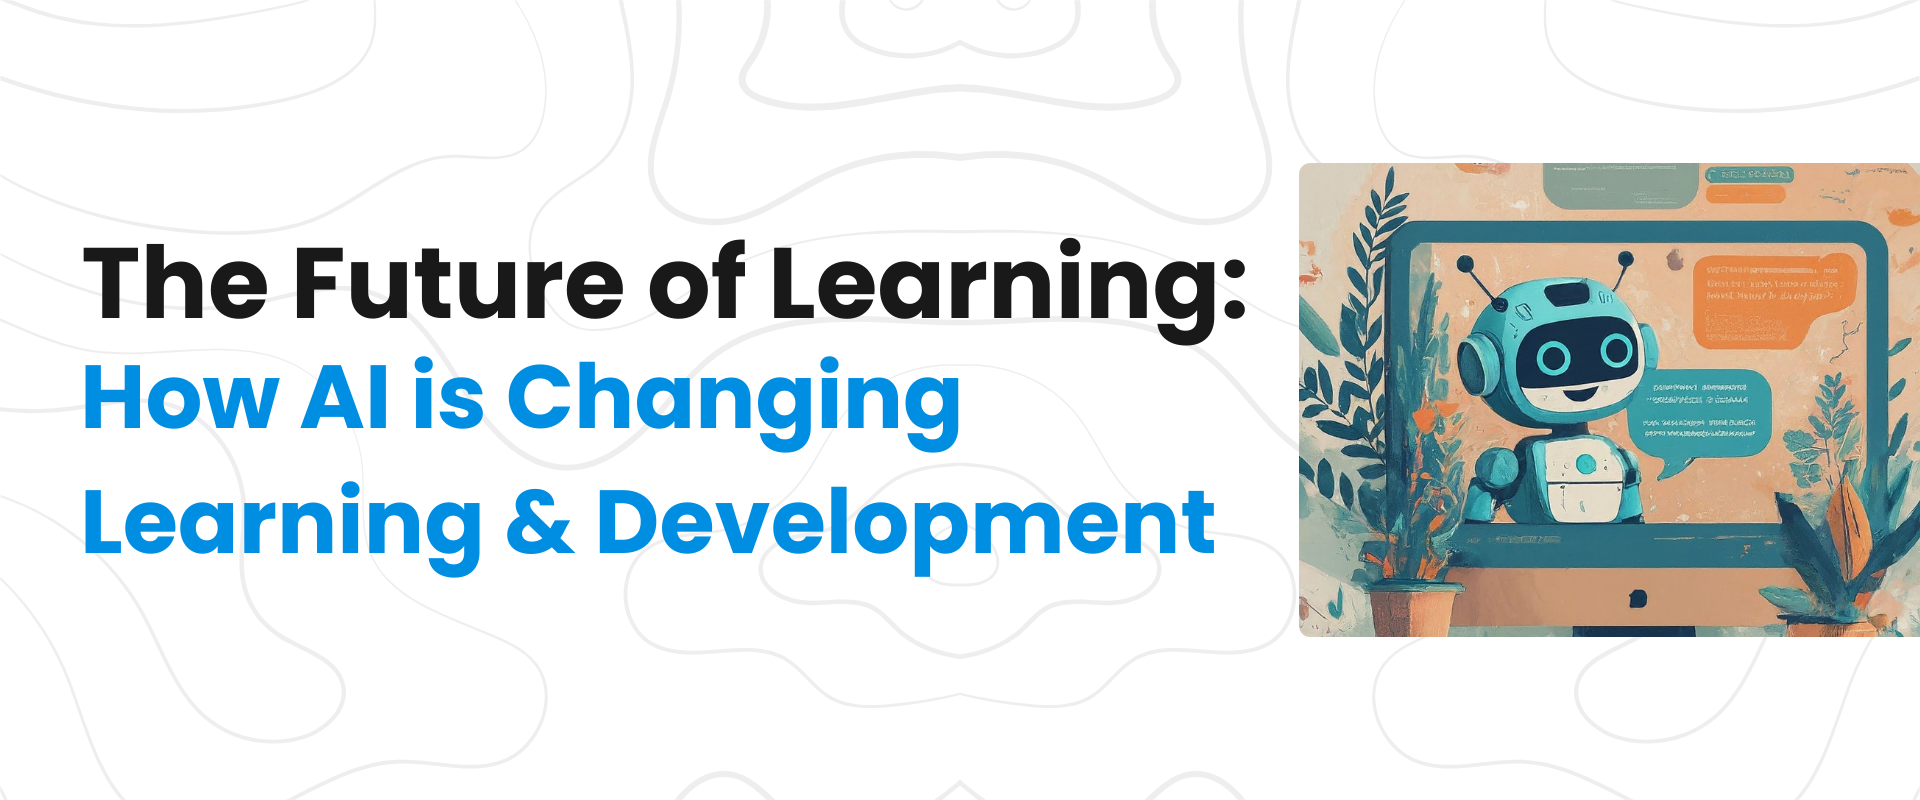 How AI is Changing Learning & Development